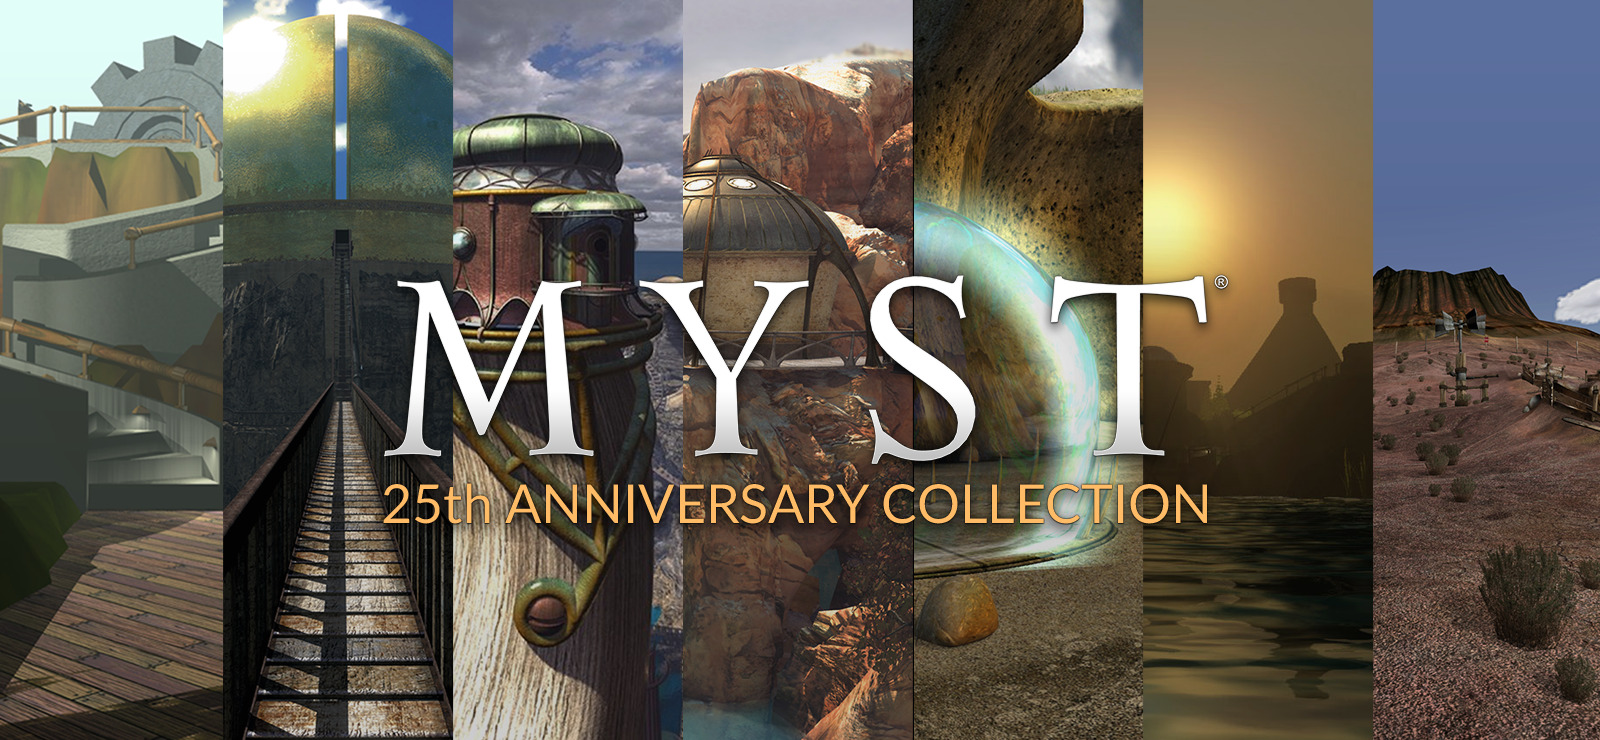 Myst 25th Anniversary Collection on GOG.com